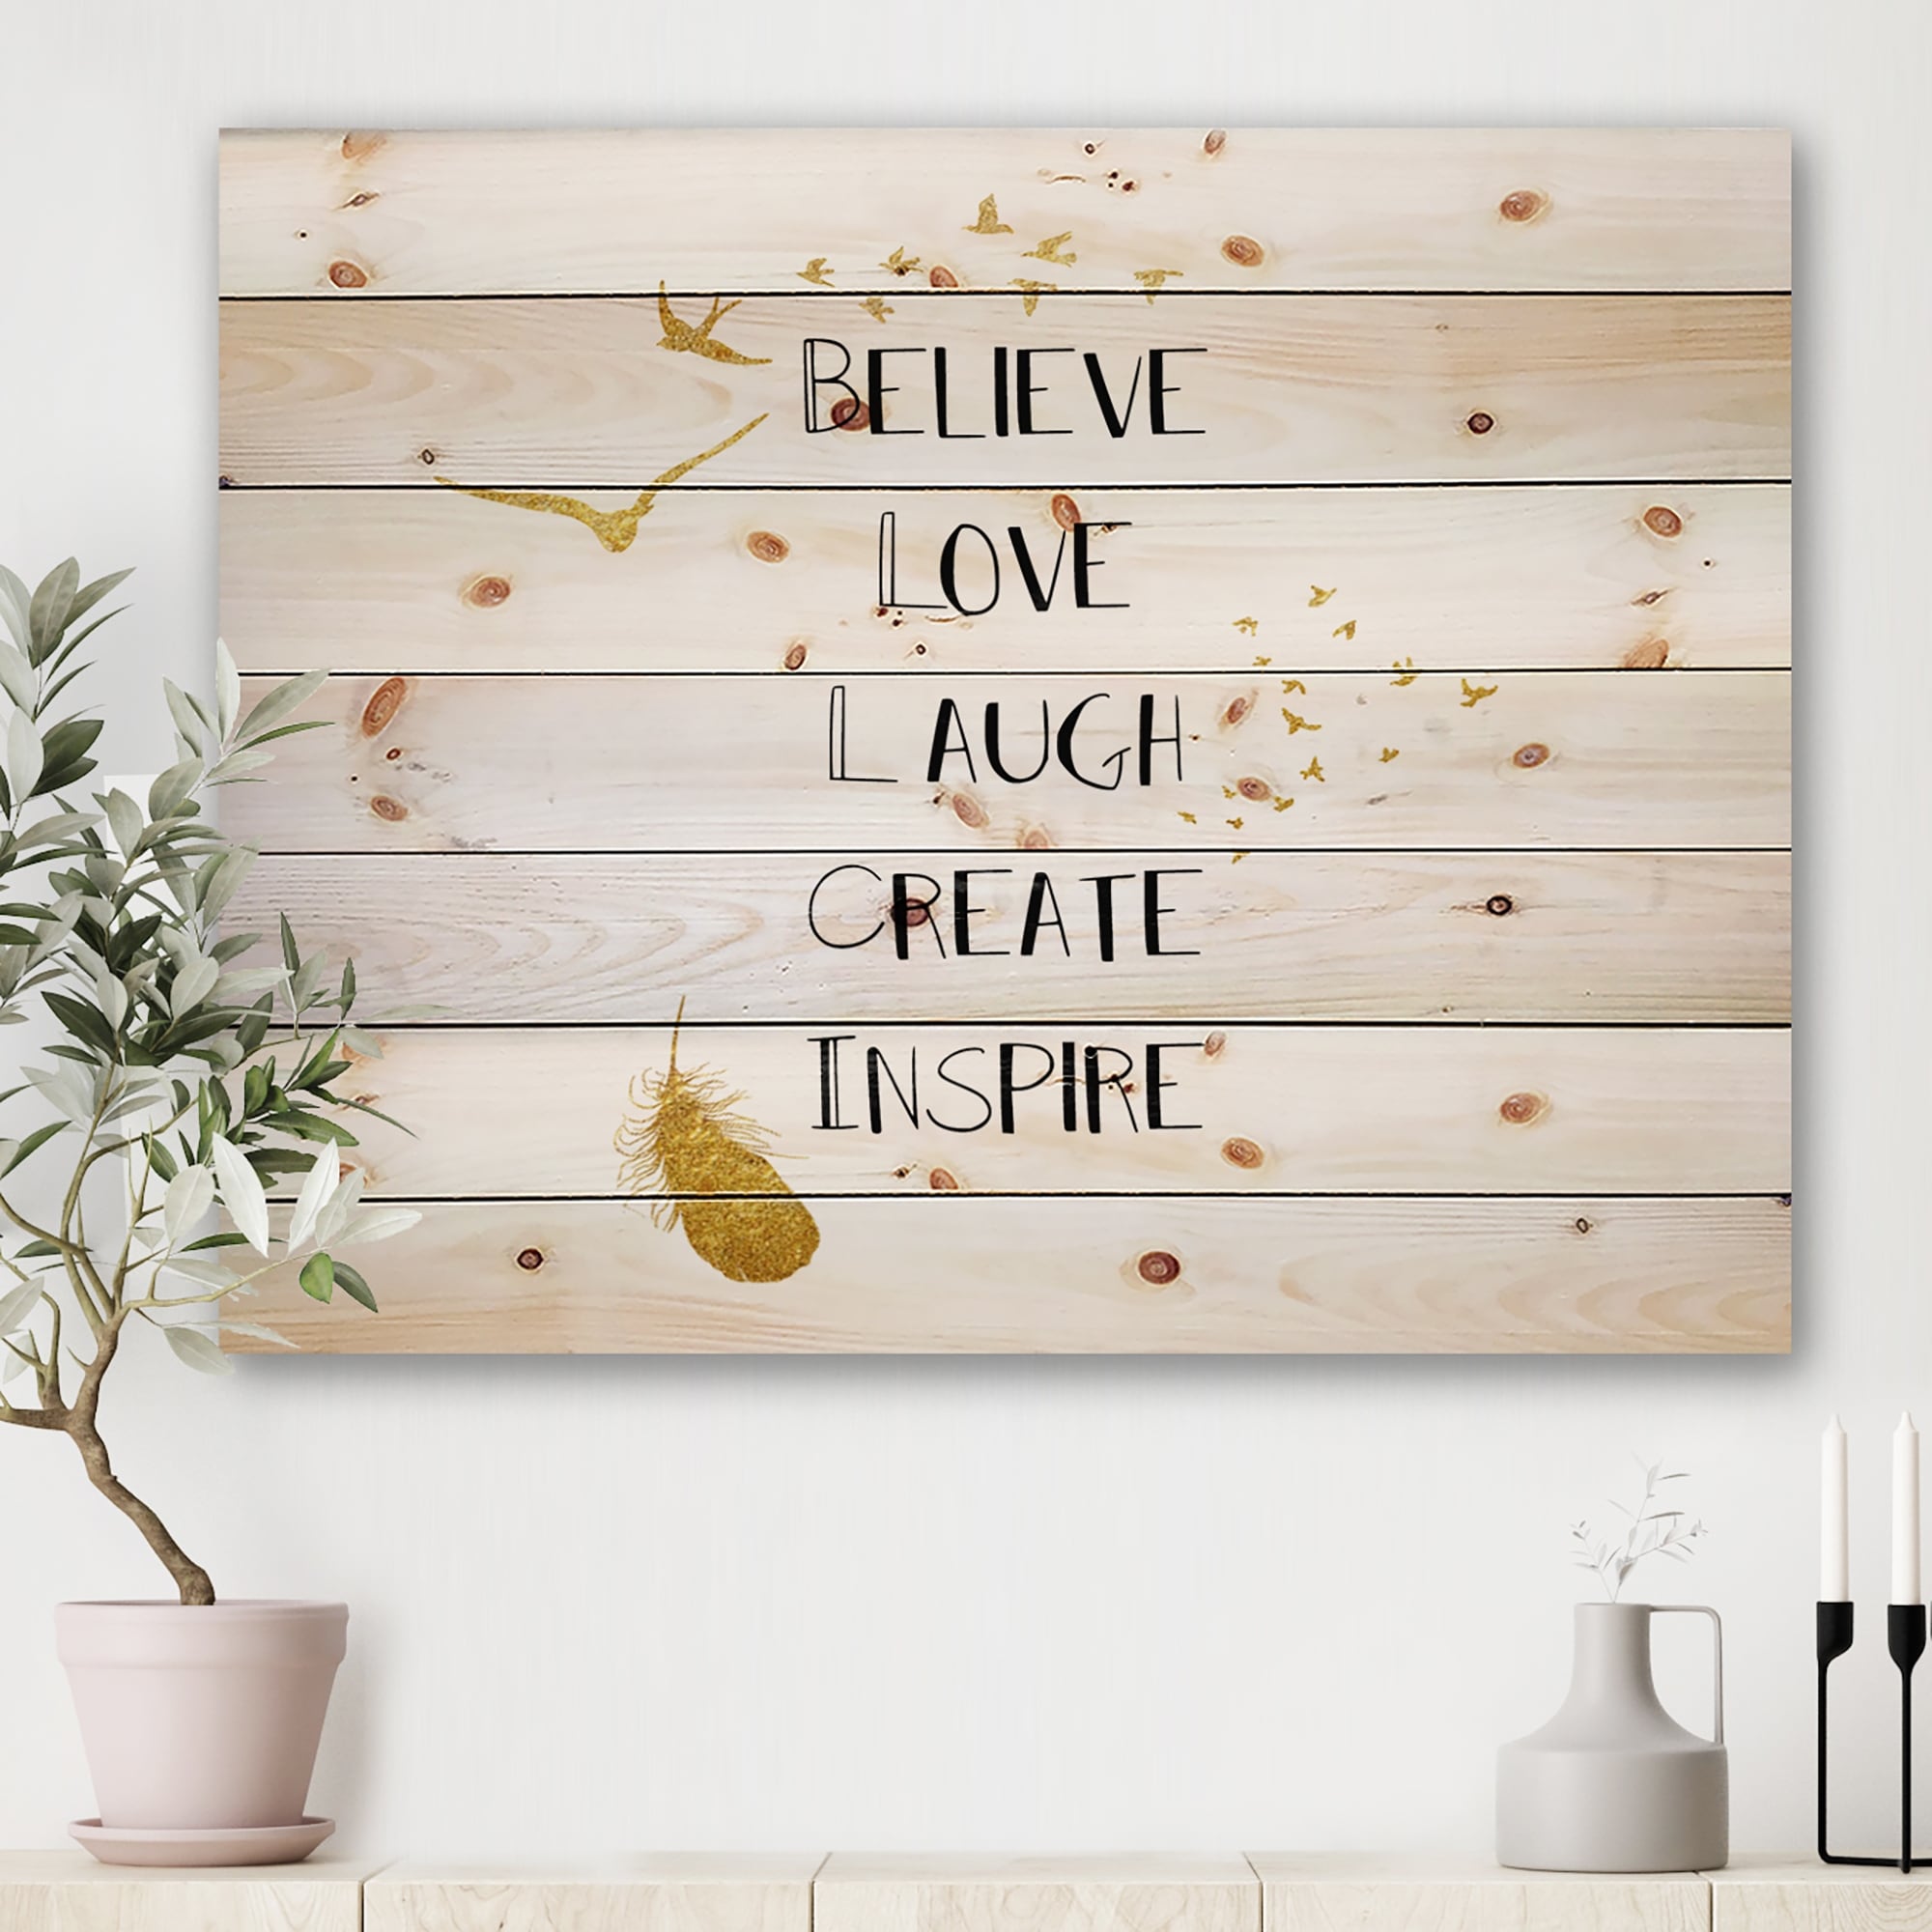 Green Leaves Bathroom Wall Decor 3 Pieces Rustic Wall Plaques Faith Love Hope Wall Decor Rustic Hanging Wall Plaque Inspirational Wall Art Signs Solid Wooden Wall Sign for Home Bedroom Wall Decoration 